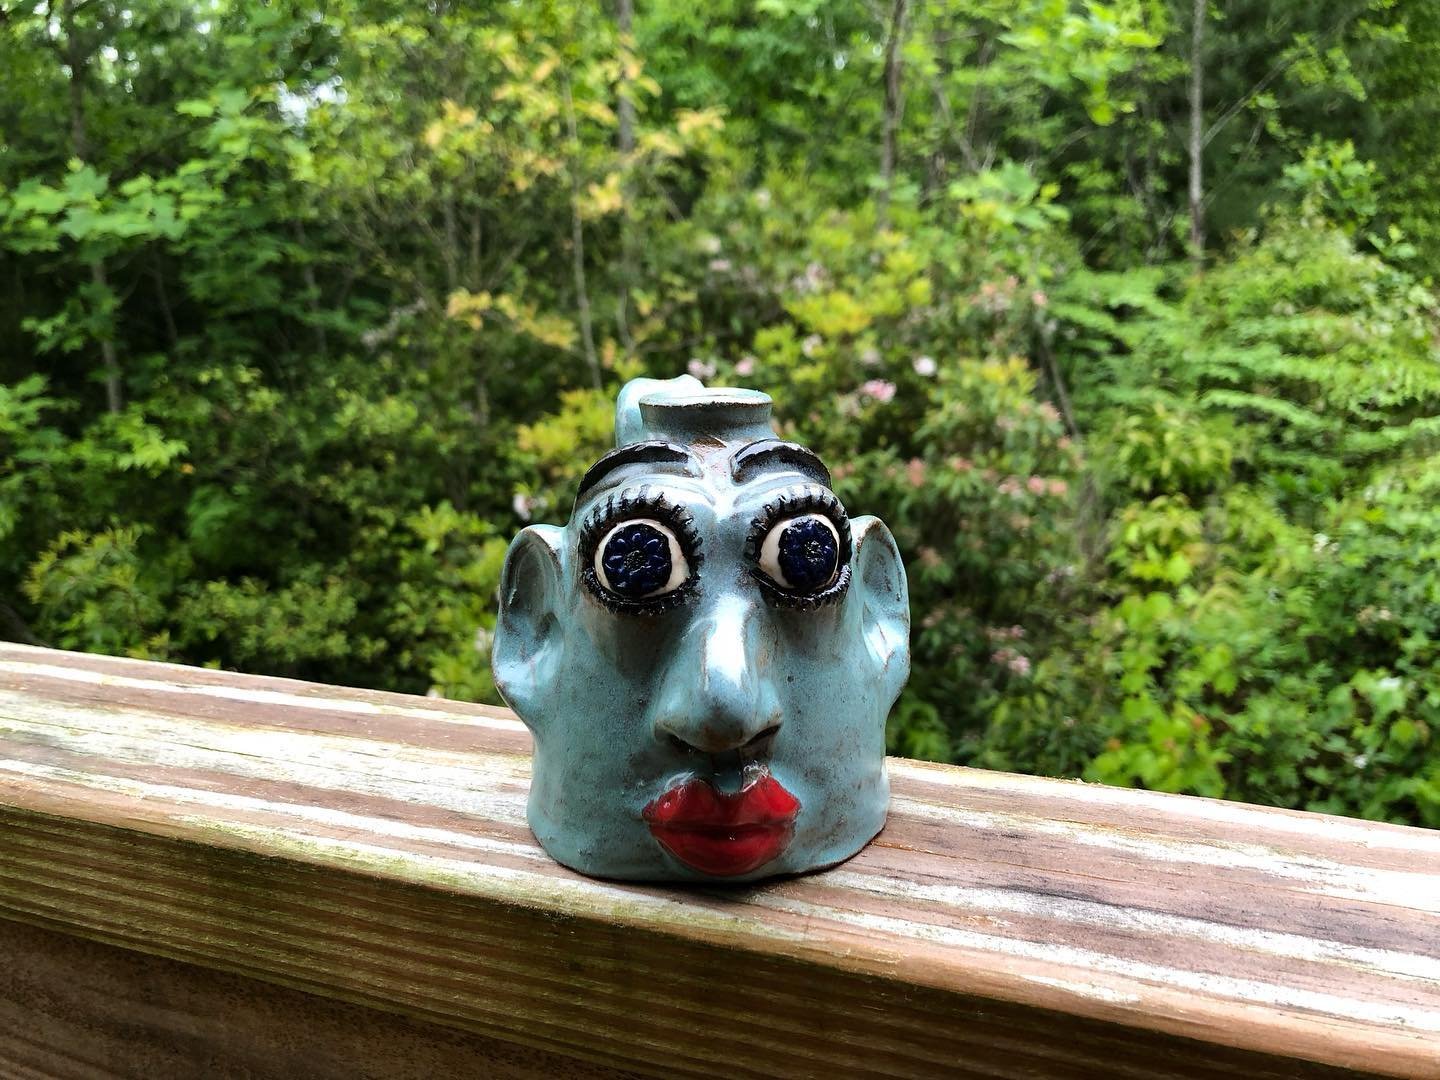 I want to close out the Spring Southern Pottery Show with a special thank you to Heather! 

She went above and beyond to make sure I had the right information and knew what to expect. 

I scored this awesome face jug from her. If you like this jug, g